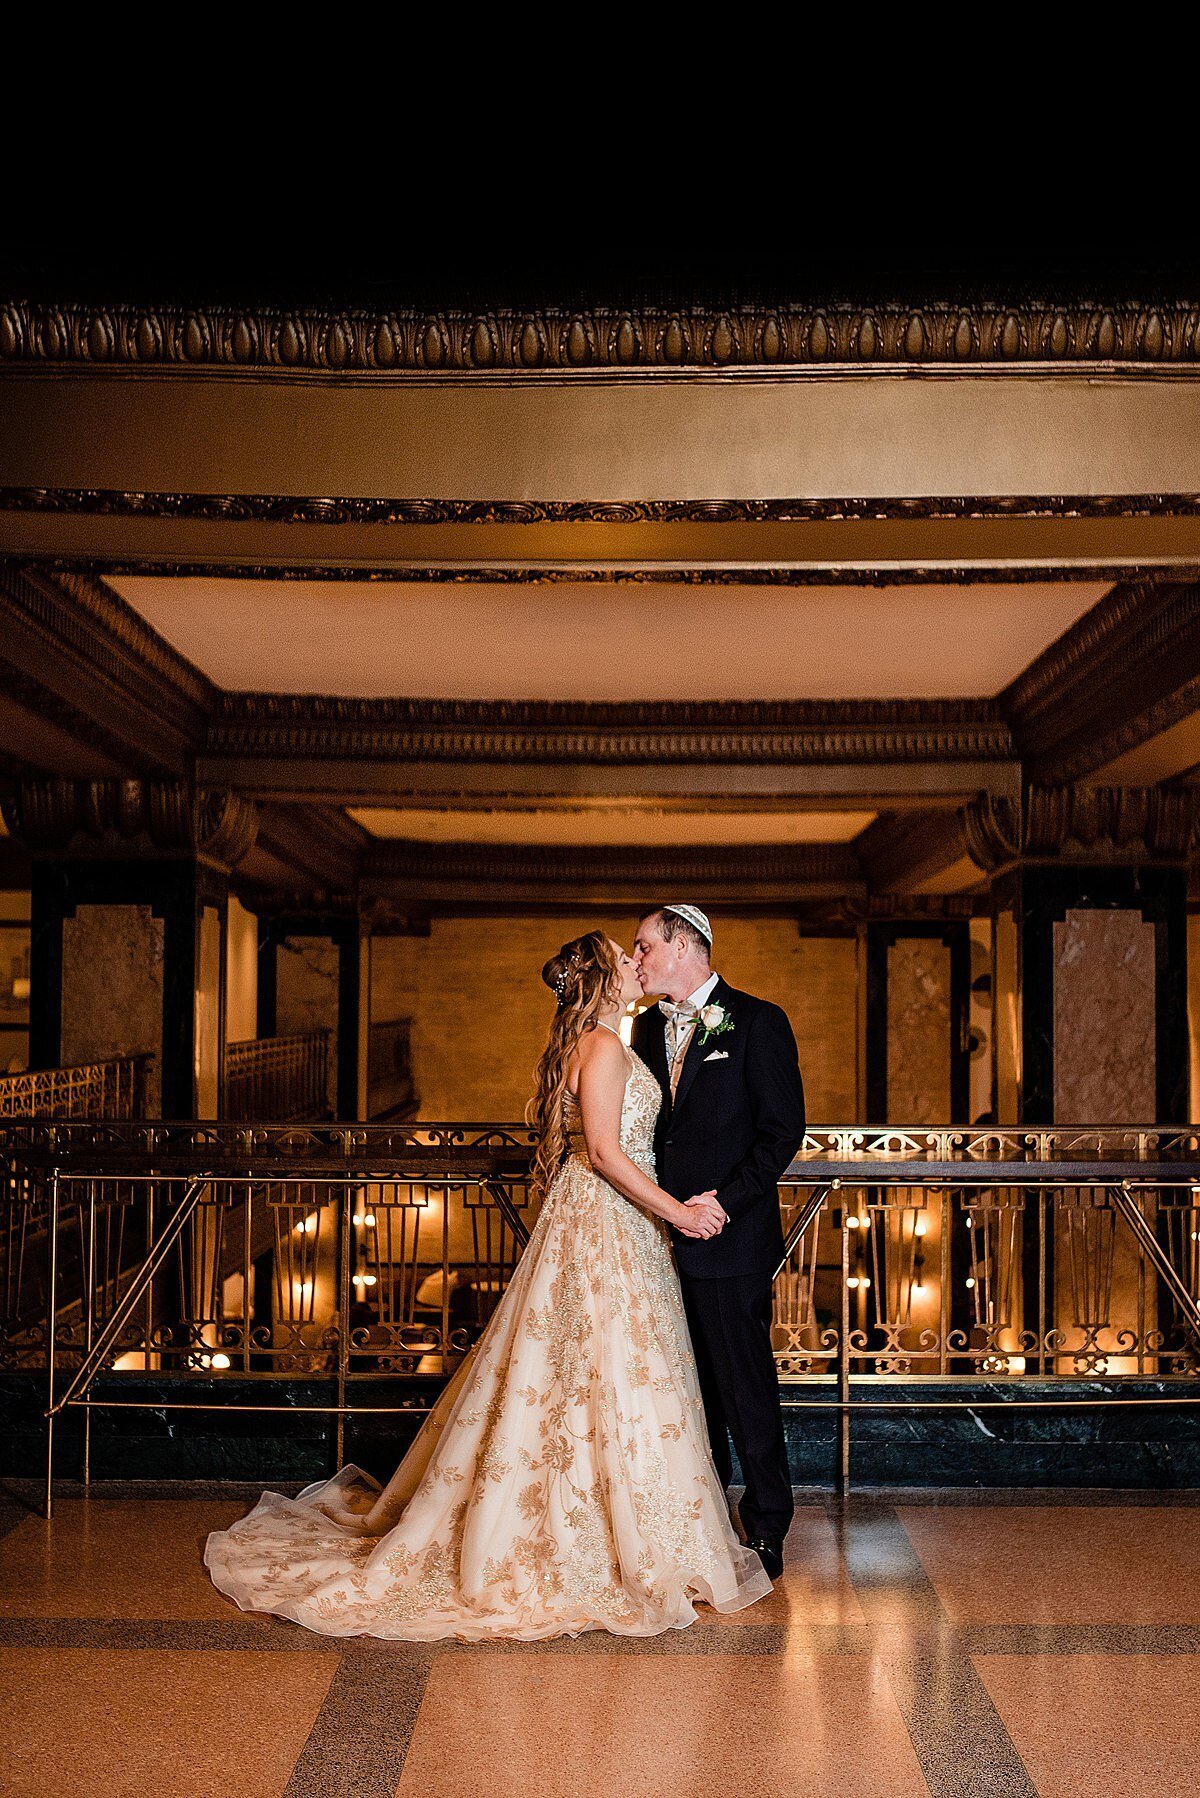 Dramatic gold and ivory wedding portrait on the 2nd floor of the historic Noelle Nashville building